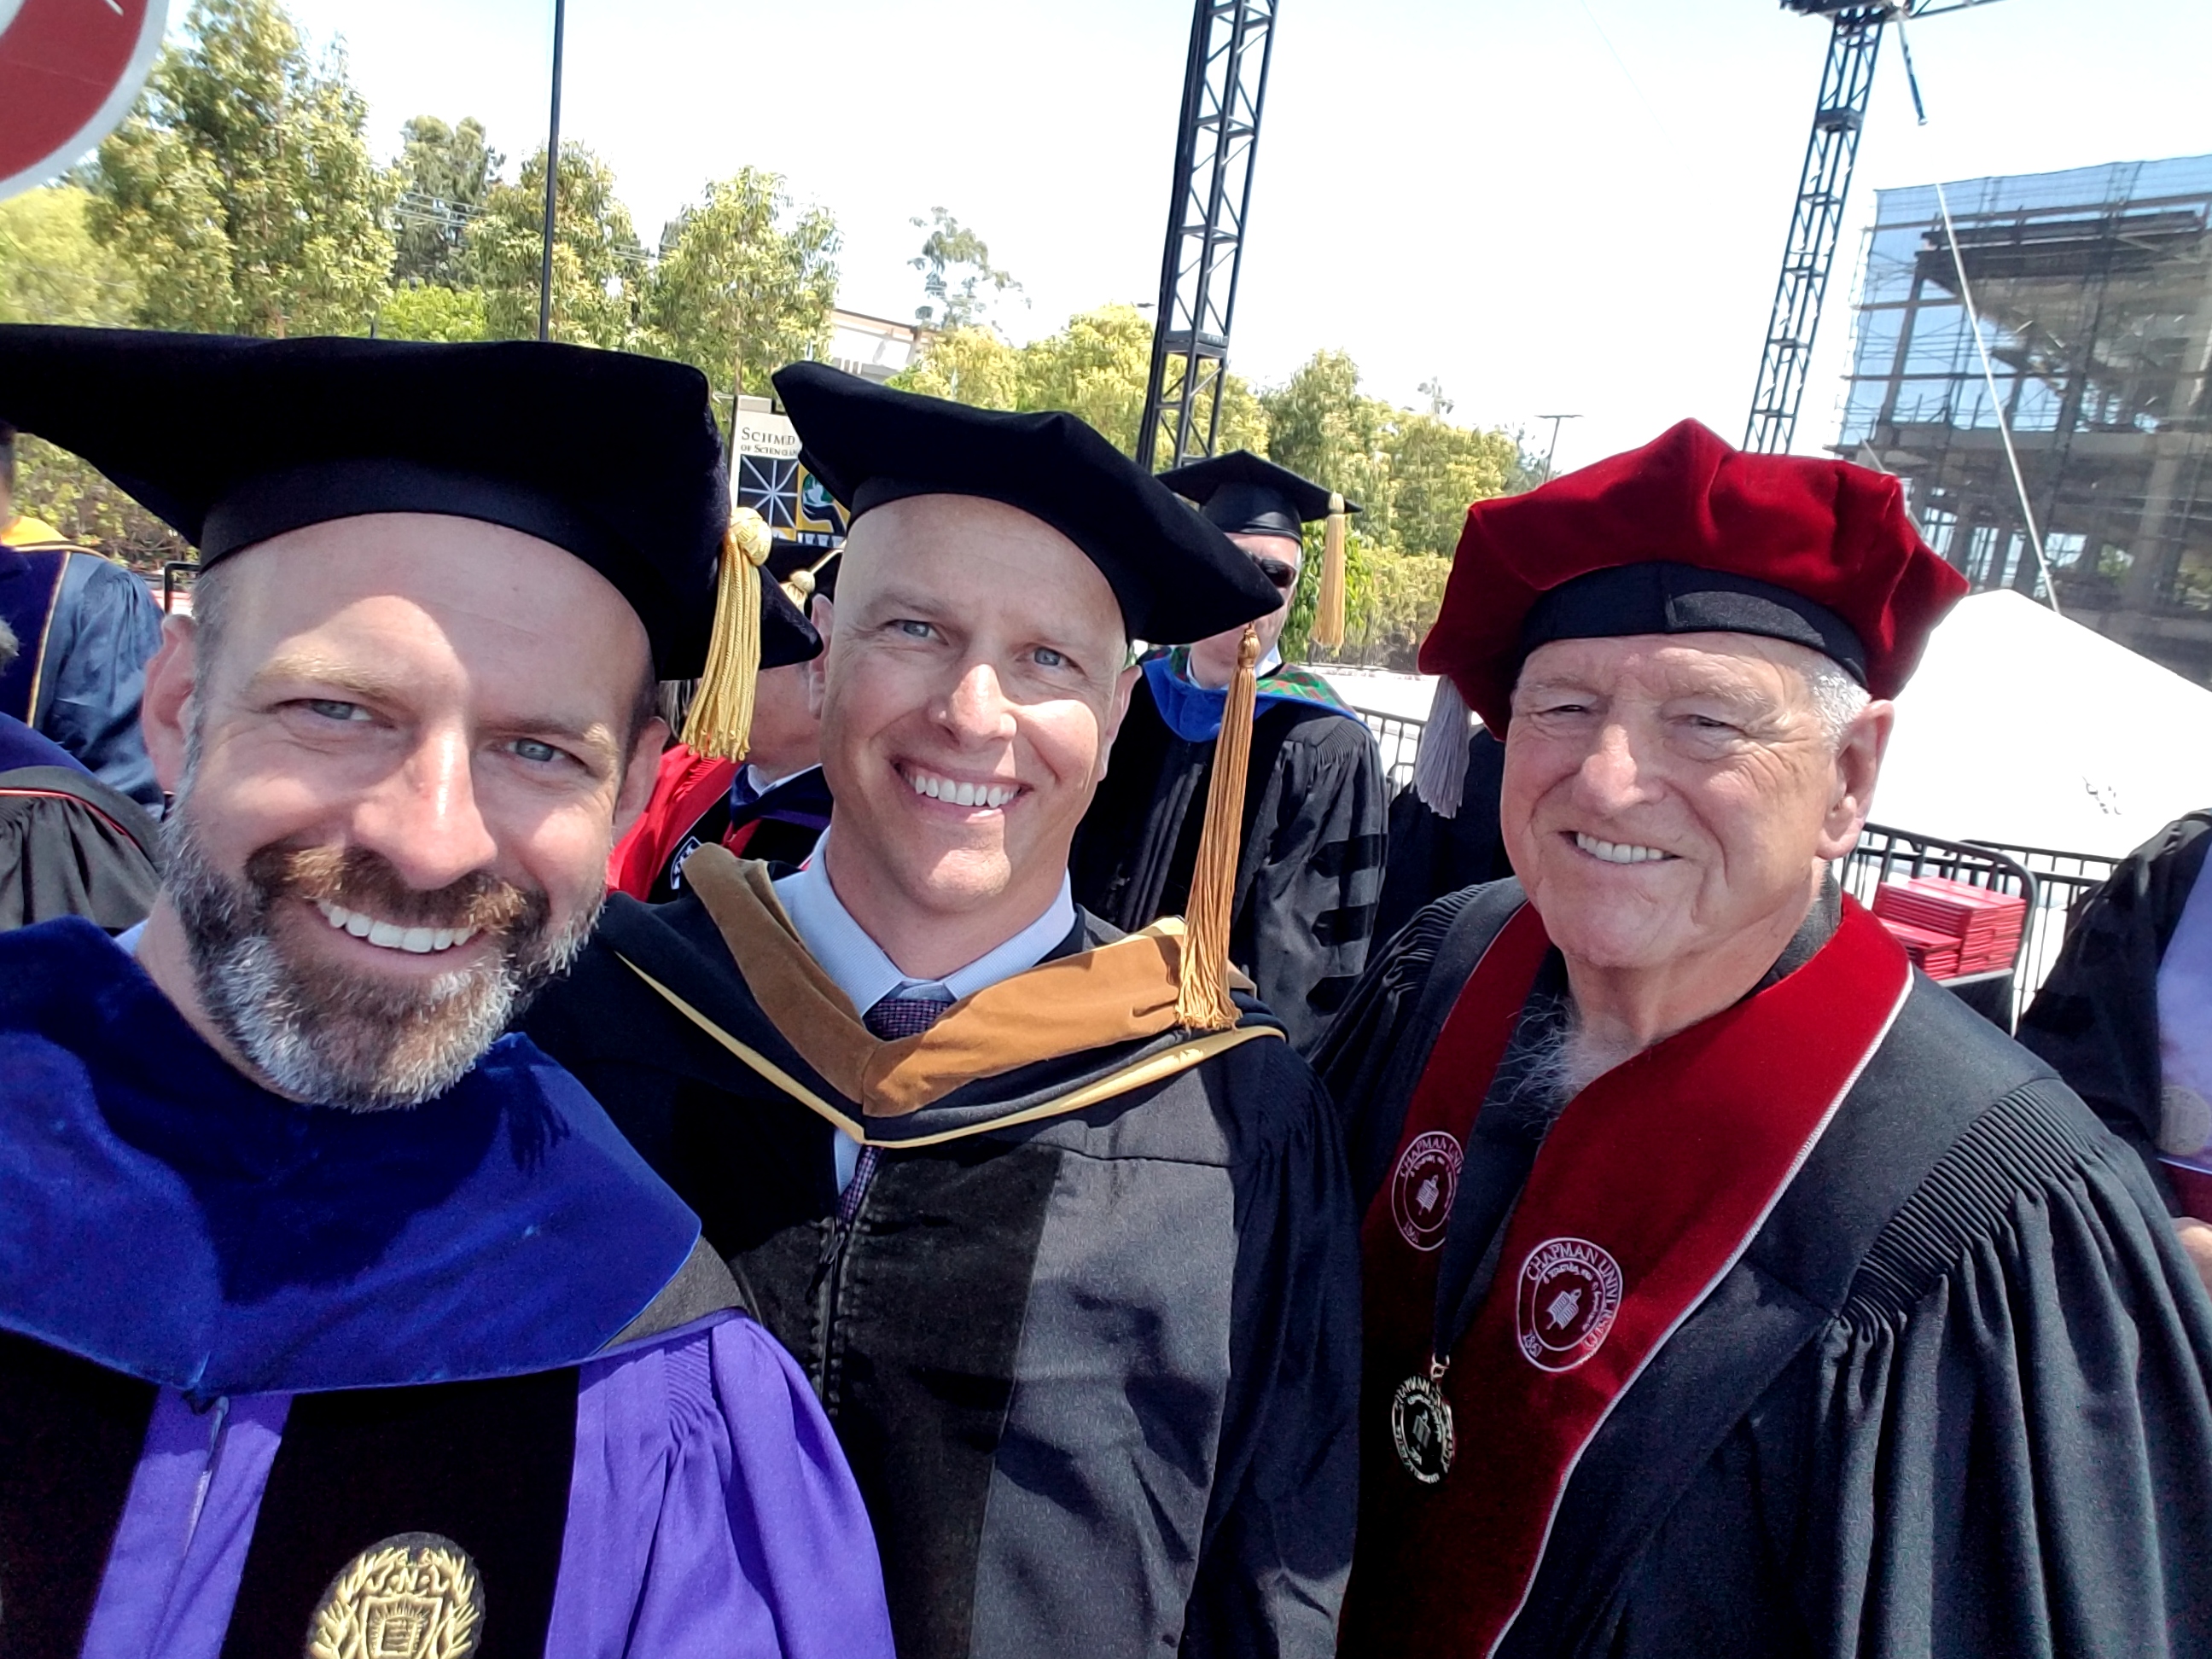 Schmid College Dean Andrew Lyon (left) on stage at 2017 Commnecement ceremony with keynote speaker Paul Cook (center) and Trustee Richard Schmid (right)